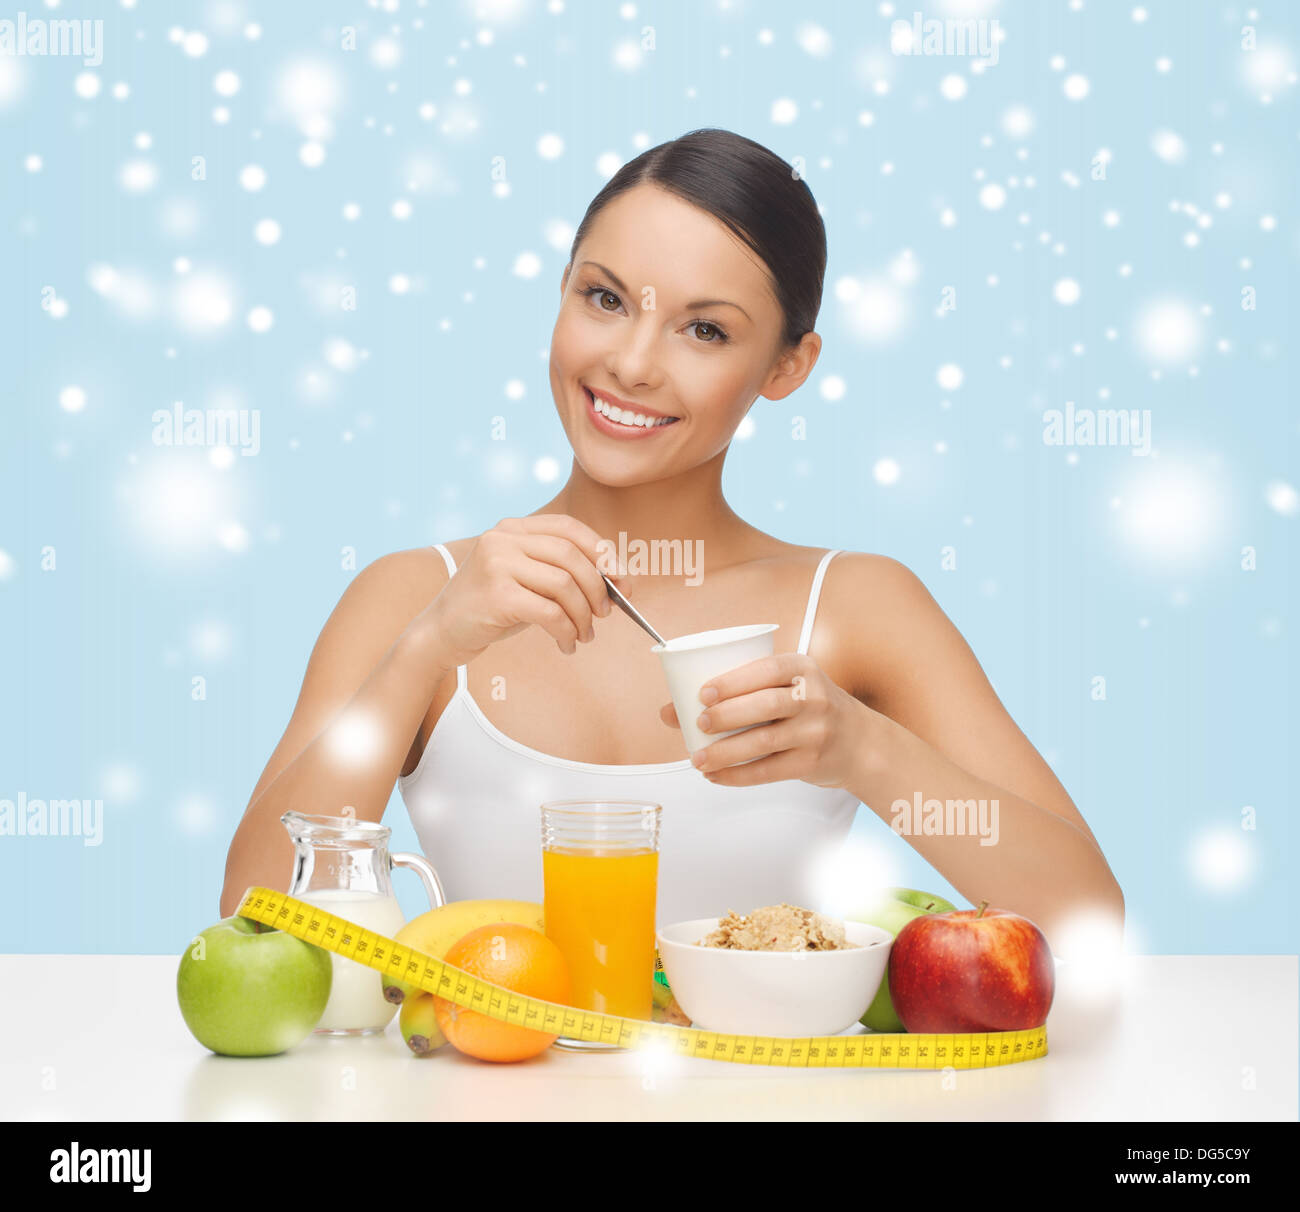 woman with healthy breakfast and measuring tape Stock Photo